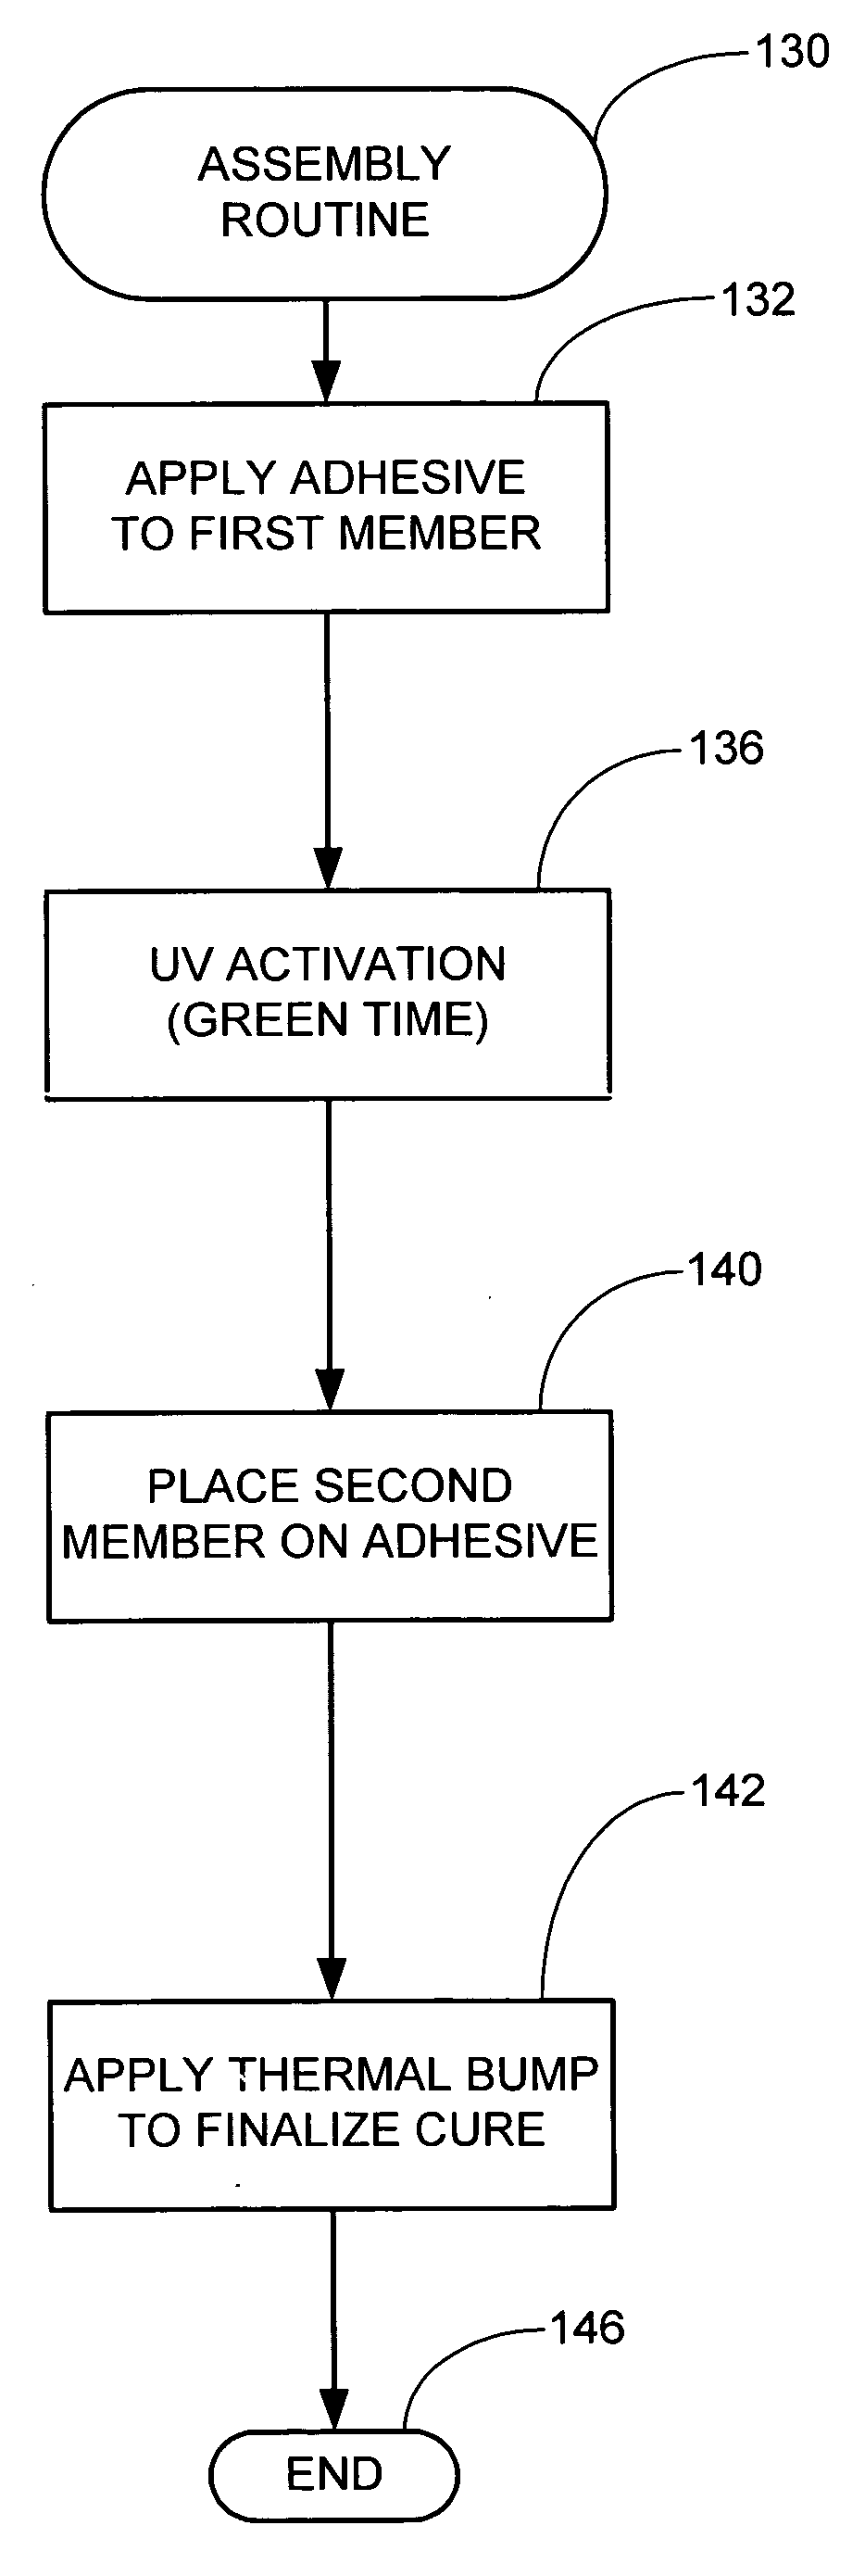 Adhesive attachment of a first member to a second member